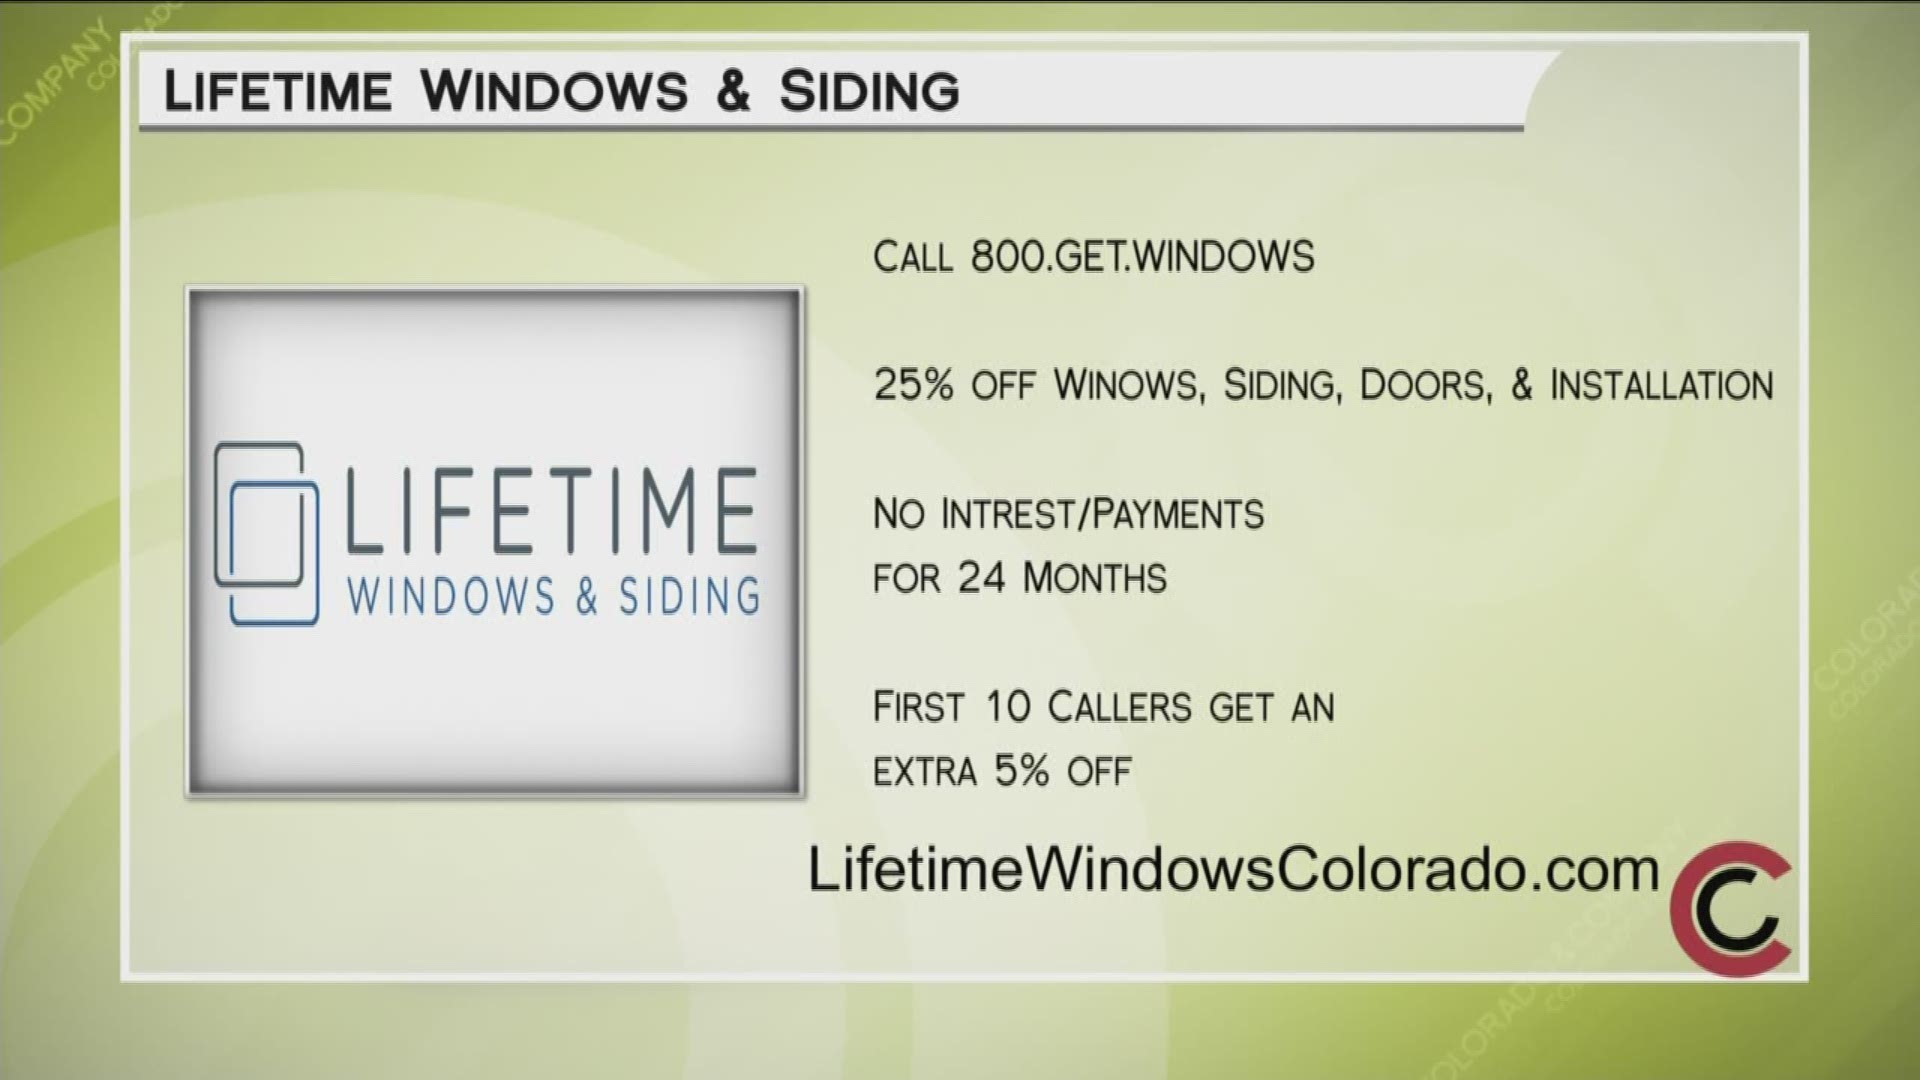 Call 800.GET.WINDOWS or visit LifetimeWindowsColorado.com to get started on replacing your windows and siding before spring!